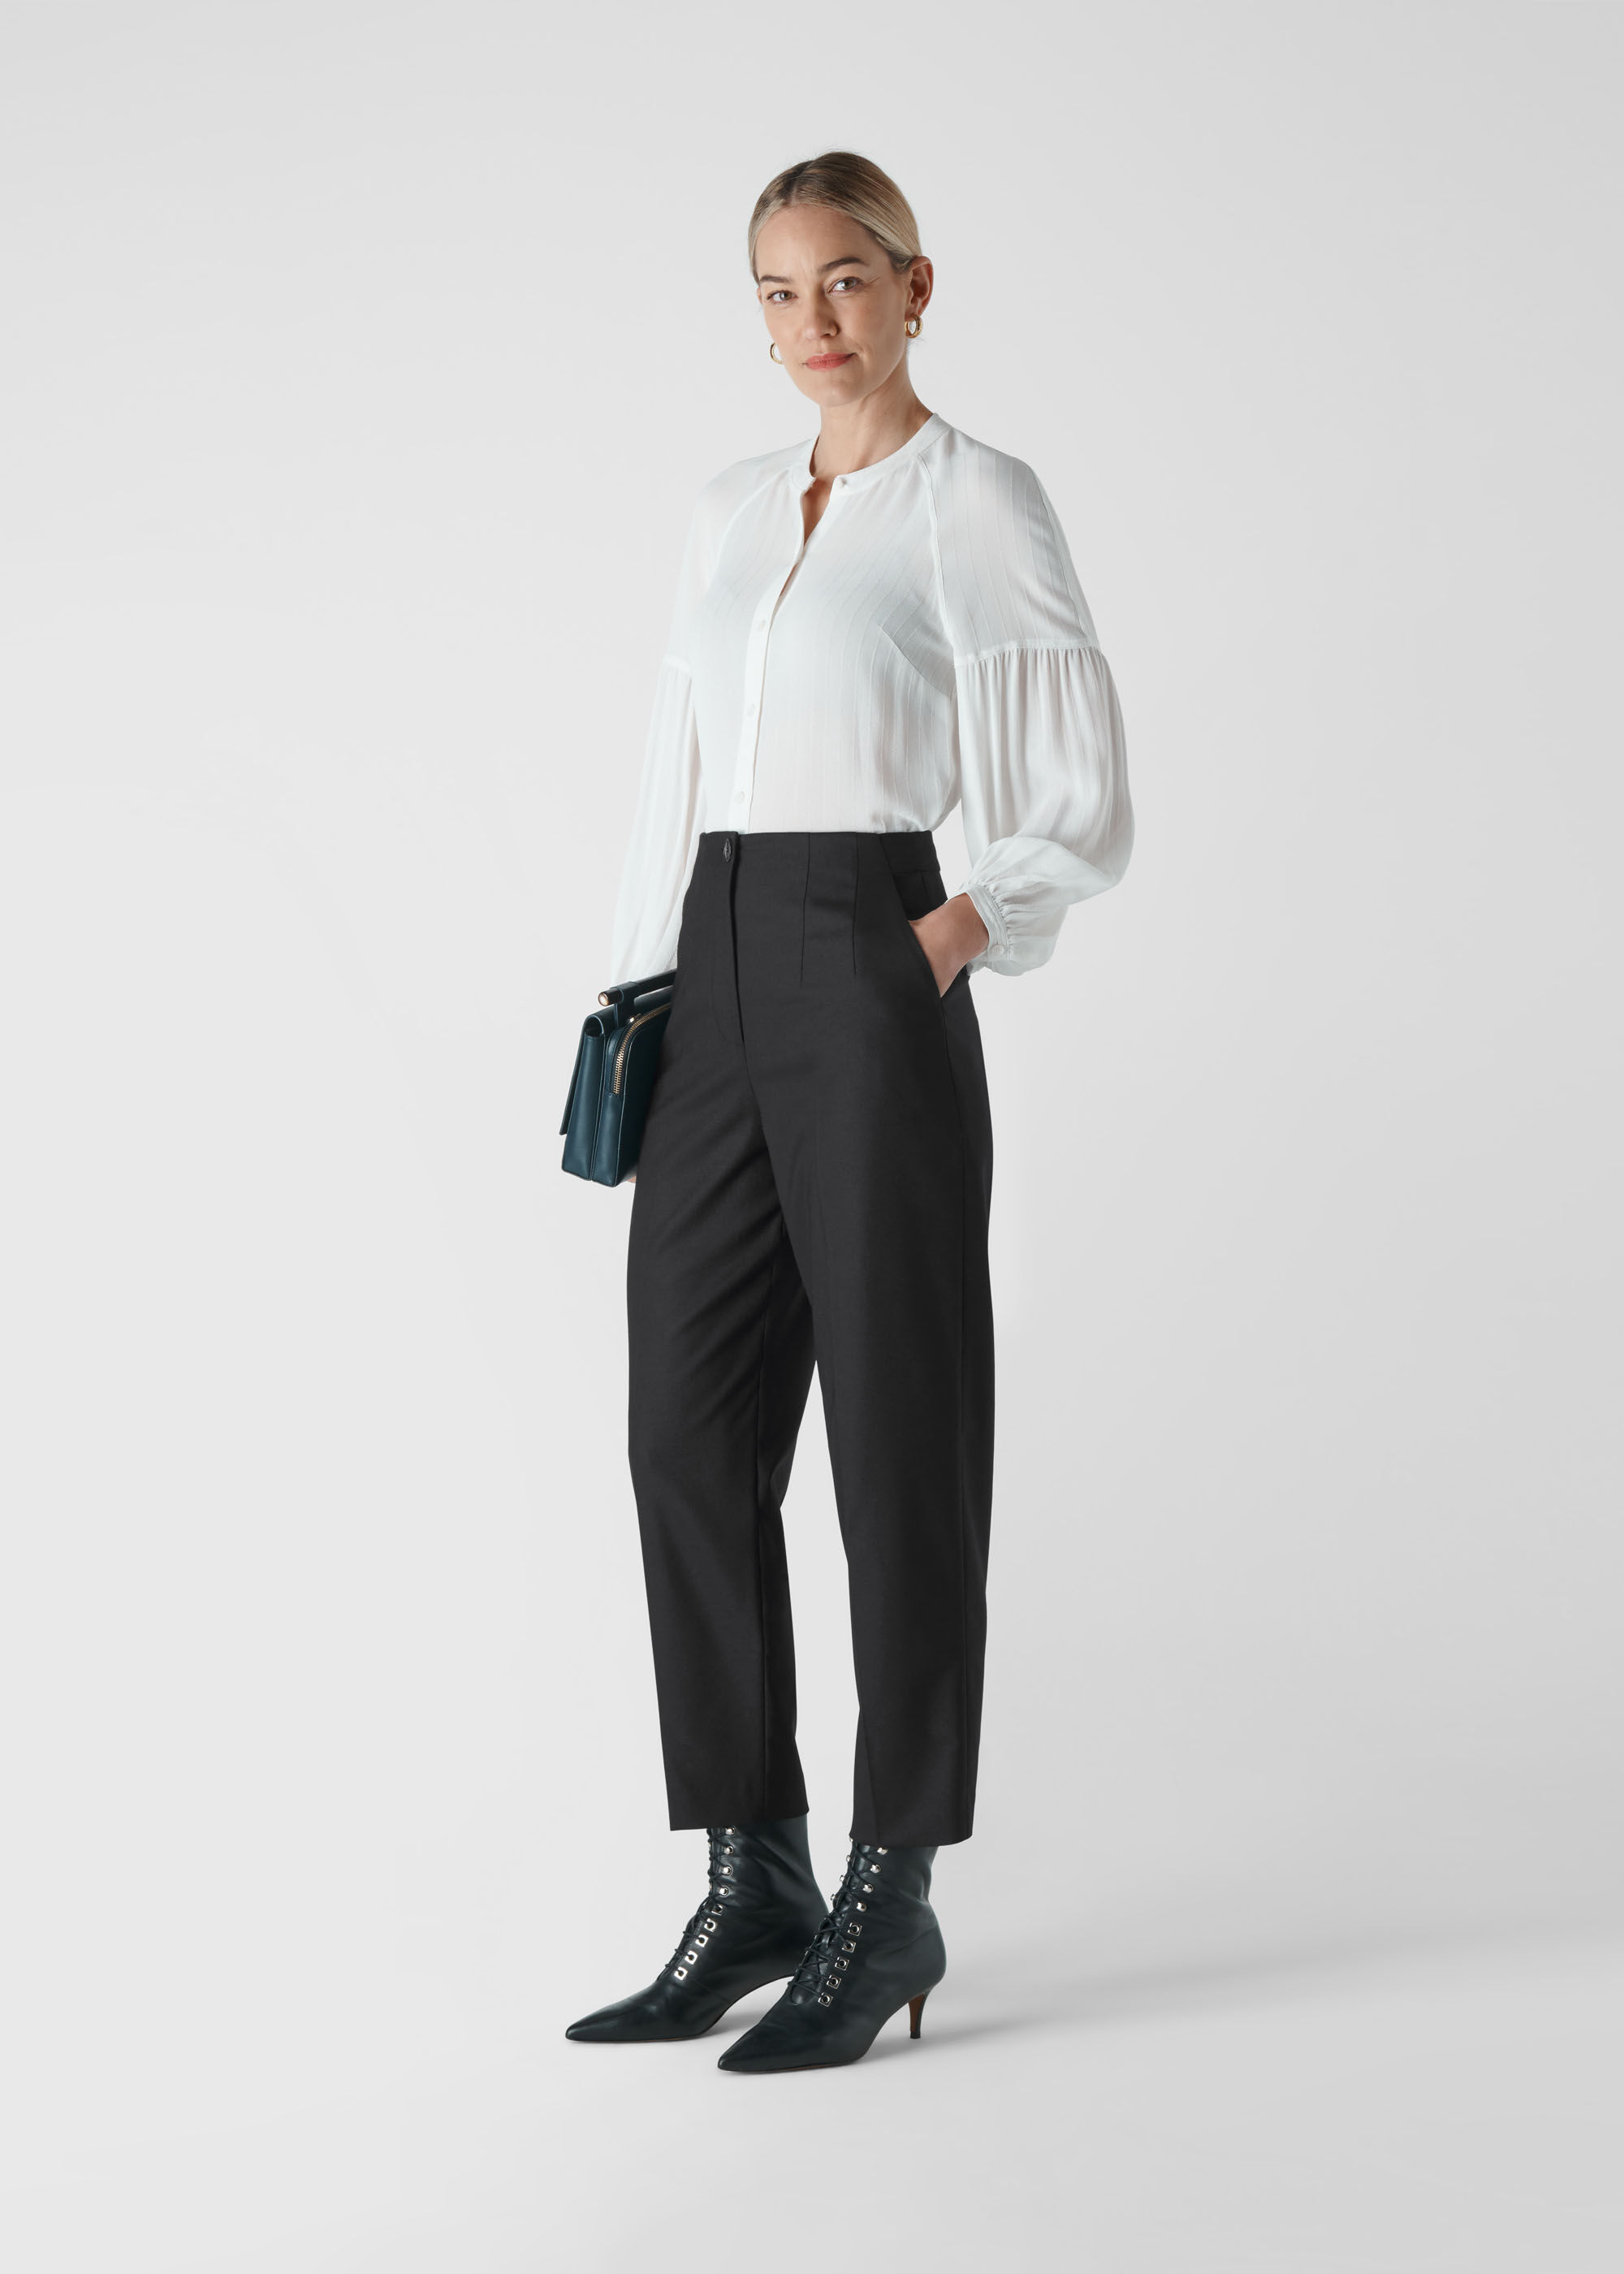 Yasmin Devonport Black Tailored Trousers  In The Style